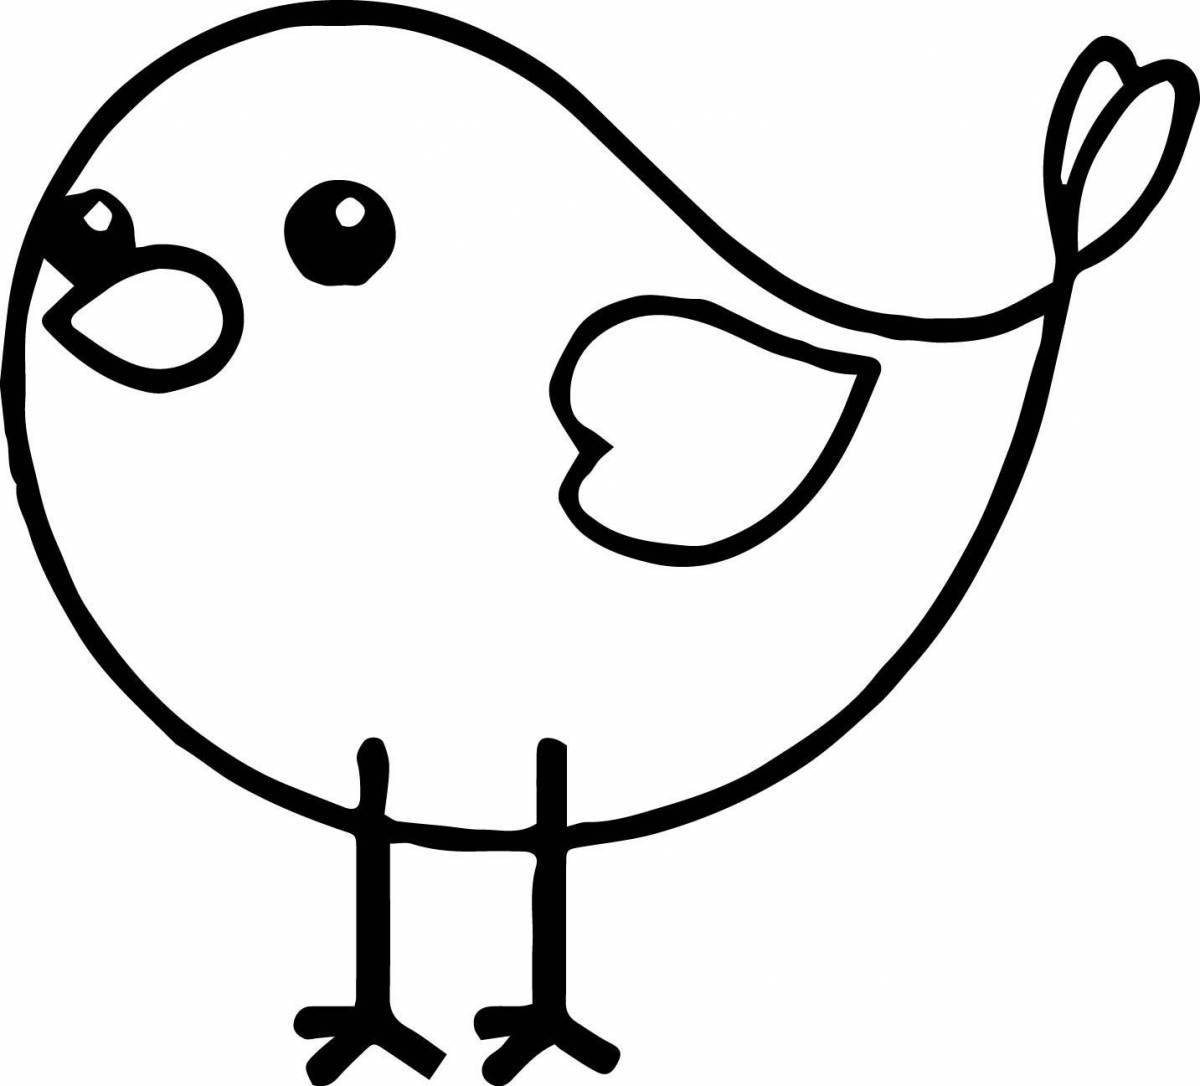 Charming bird drawing for kids